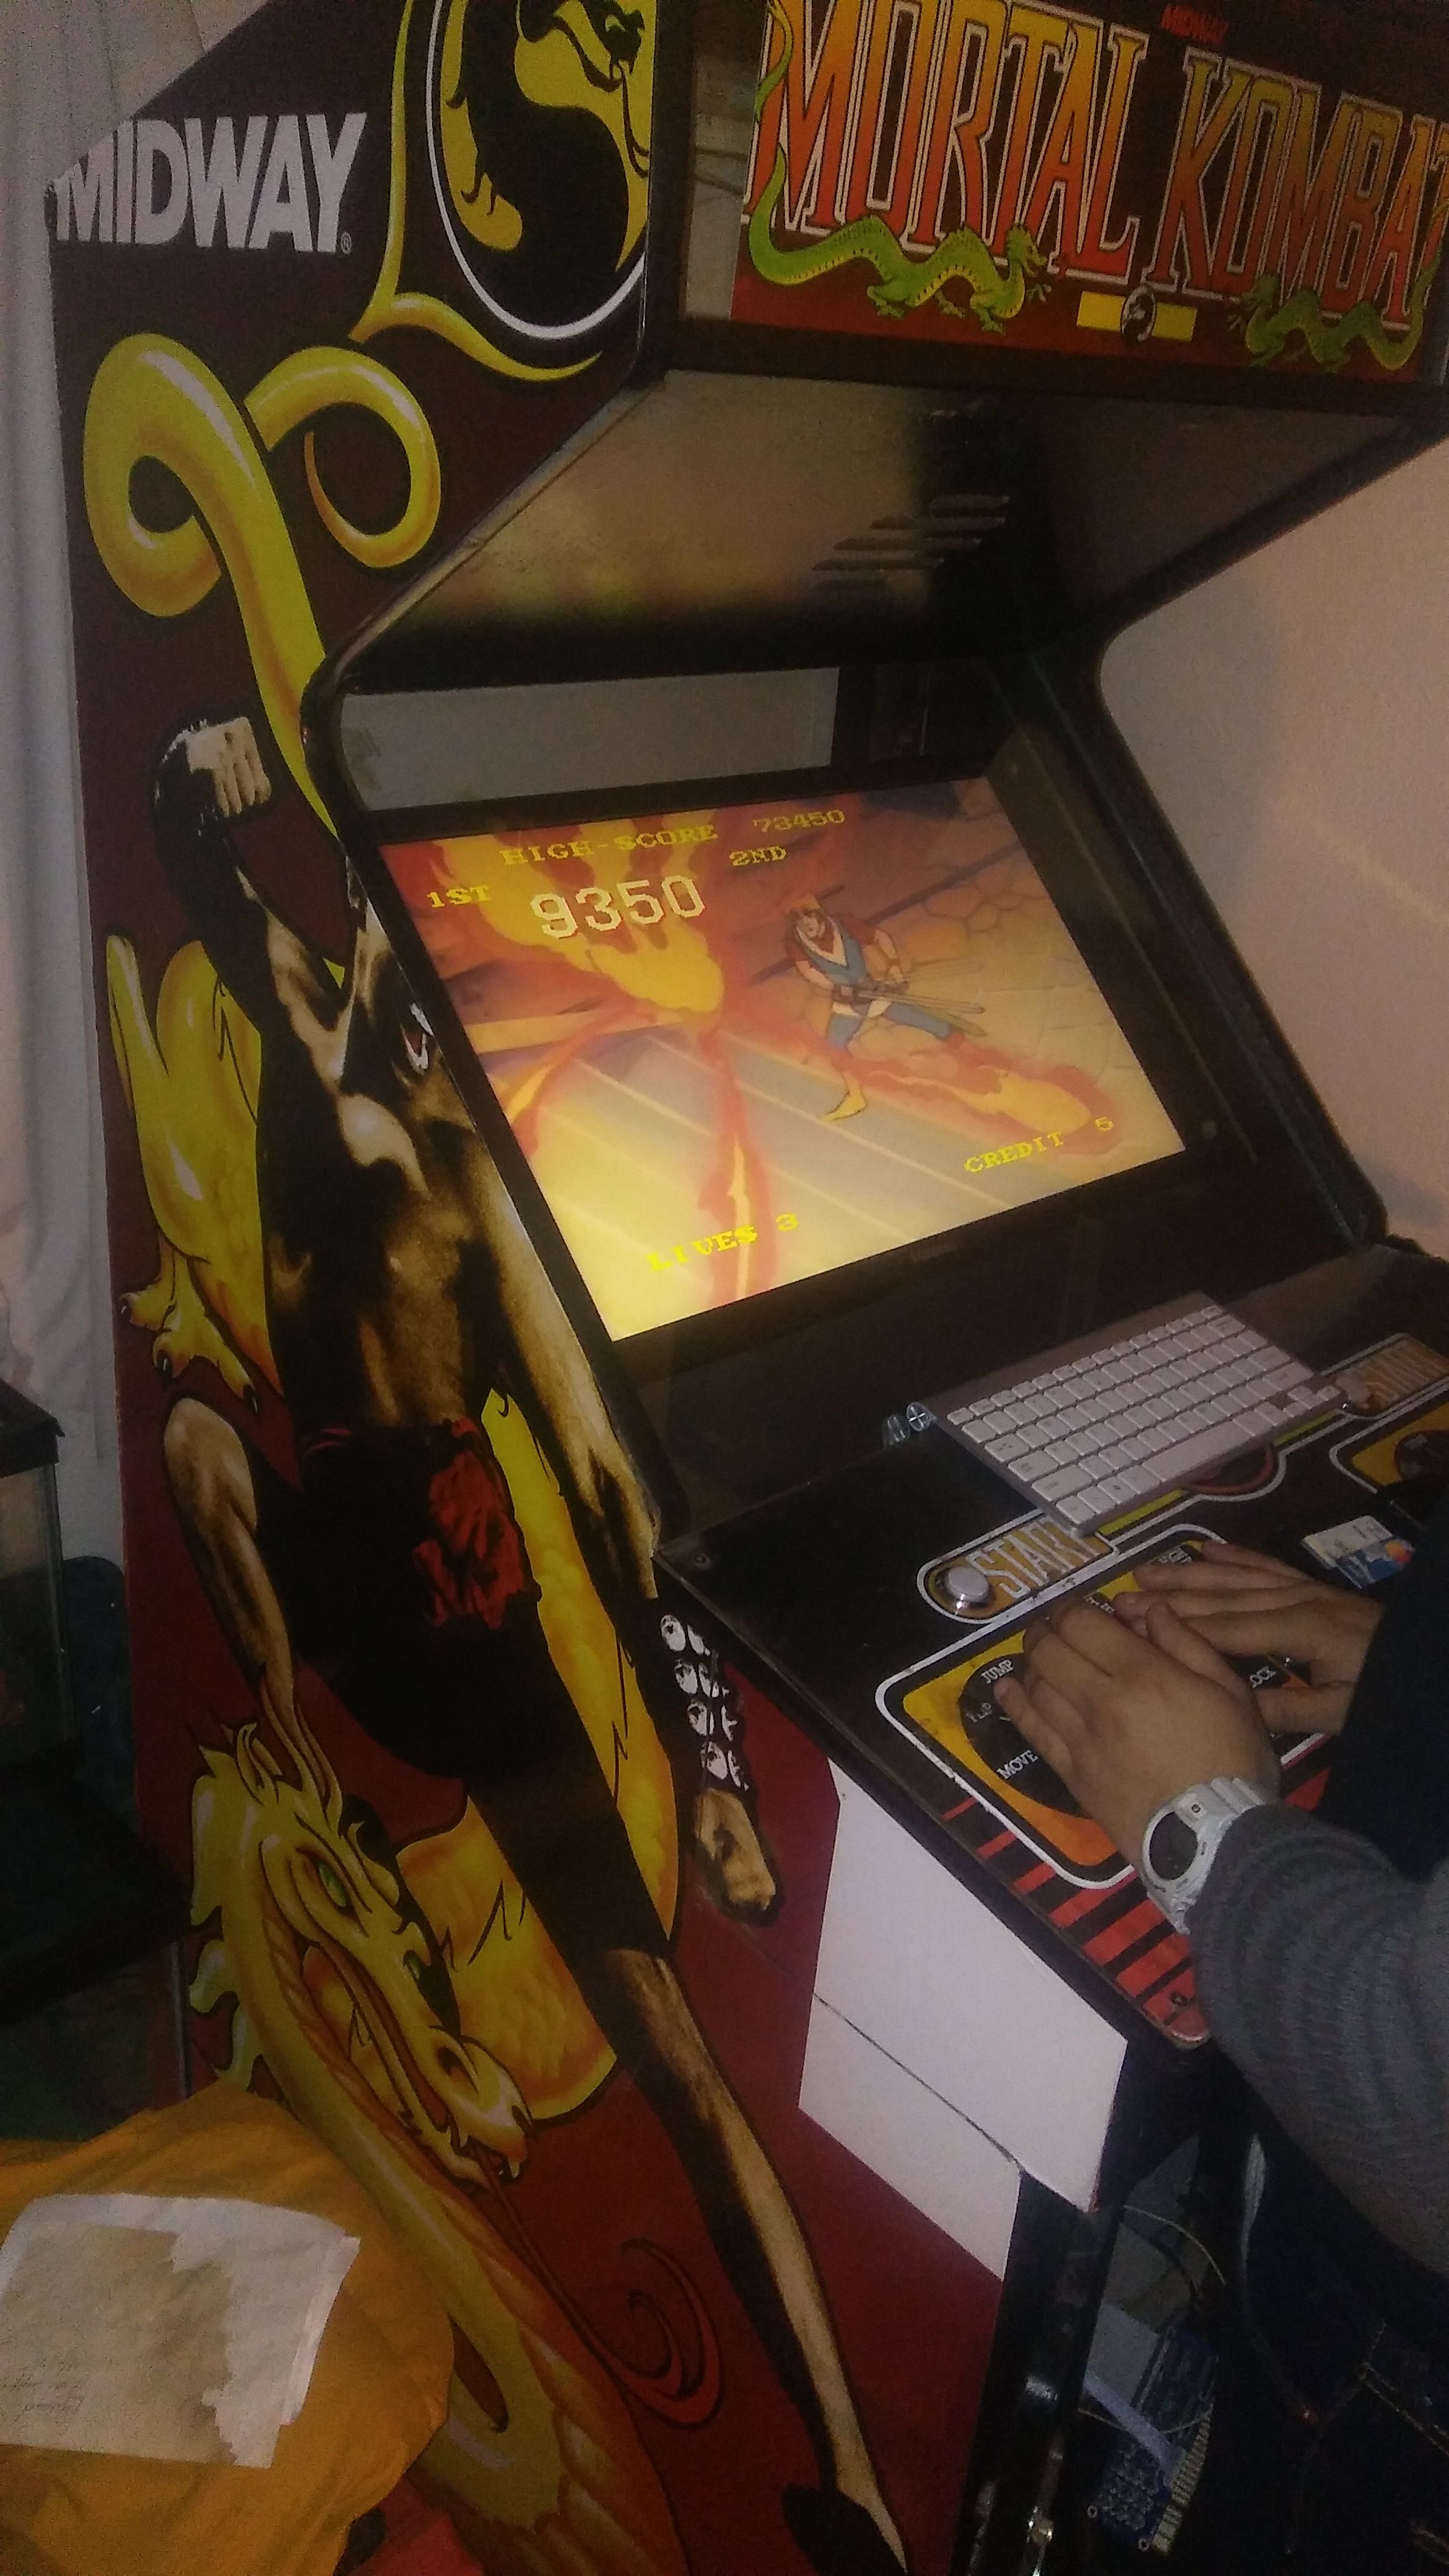 arcade game cabinet includes over 3,000 games